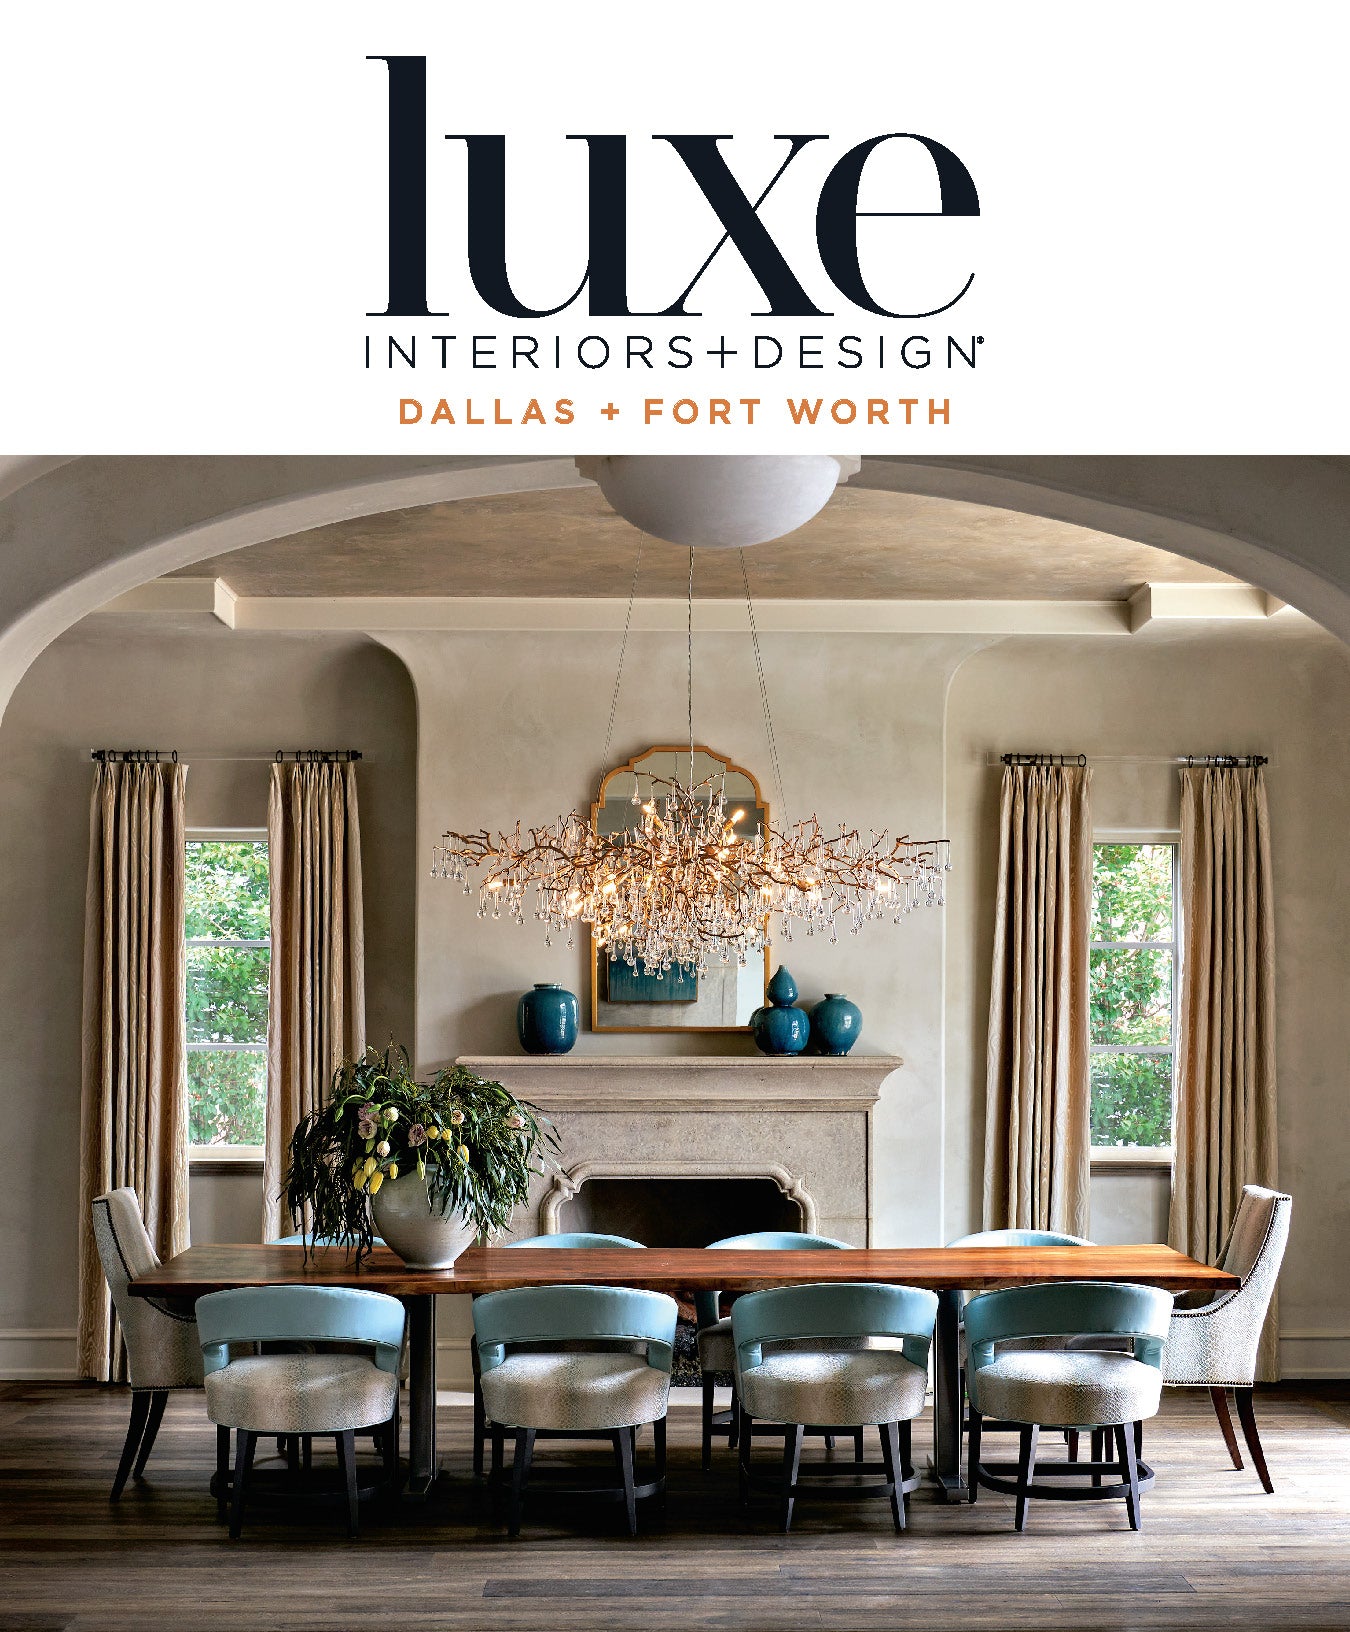 Homegrown - Mous featured in LUXE Interiors + Design